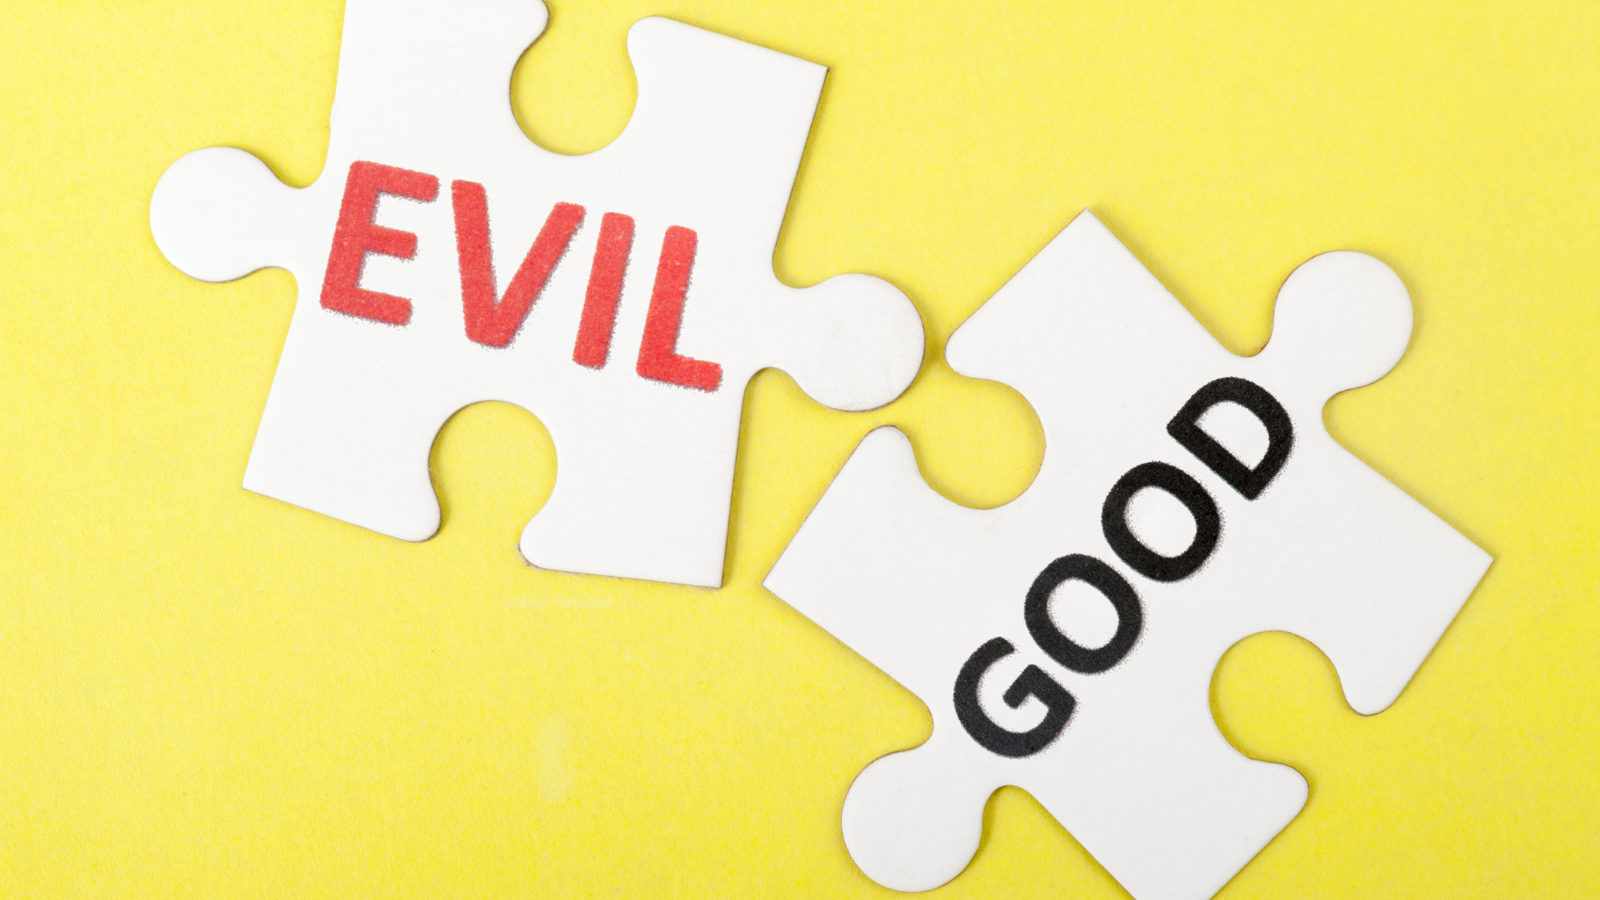 Negotiating: Use Your Power for Good, Not Evil